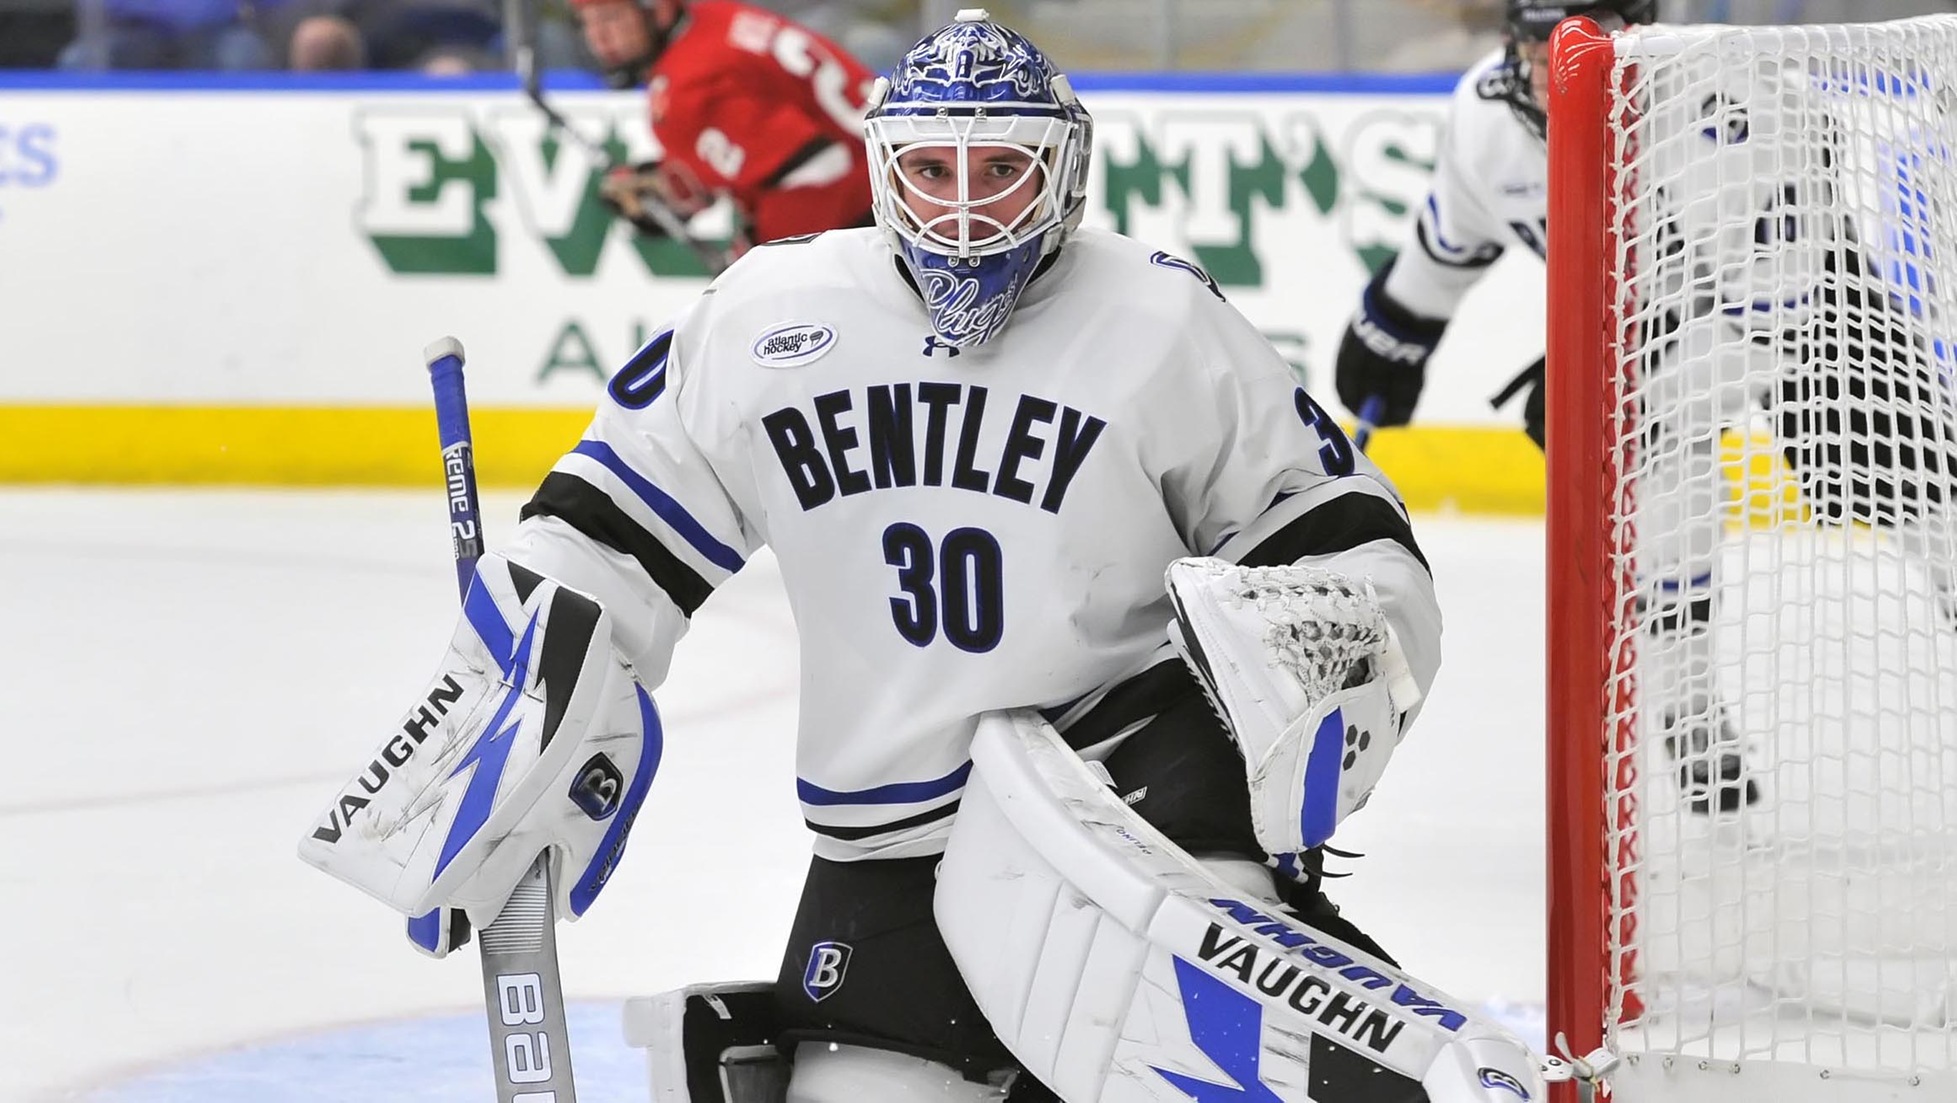 Bentley Back at Home This Weekend to Battle Niagara